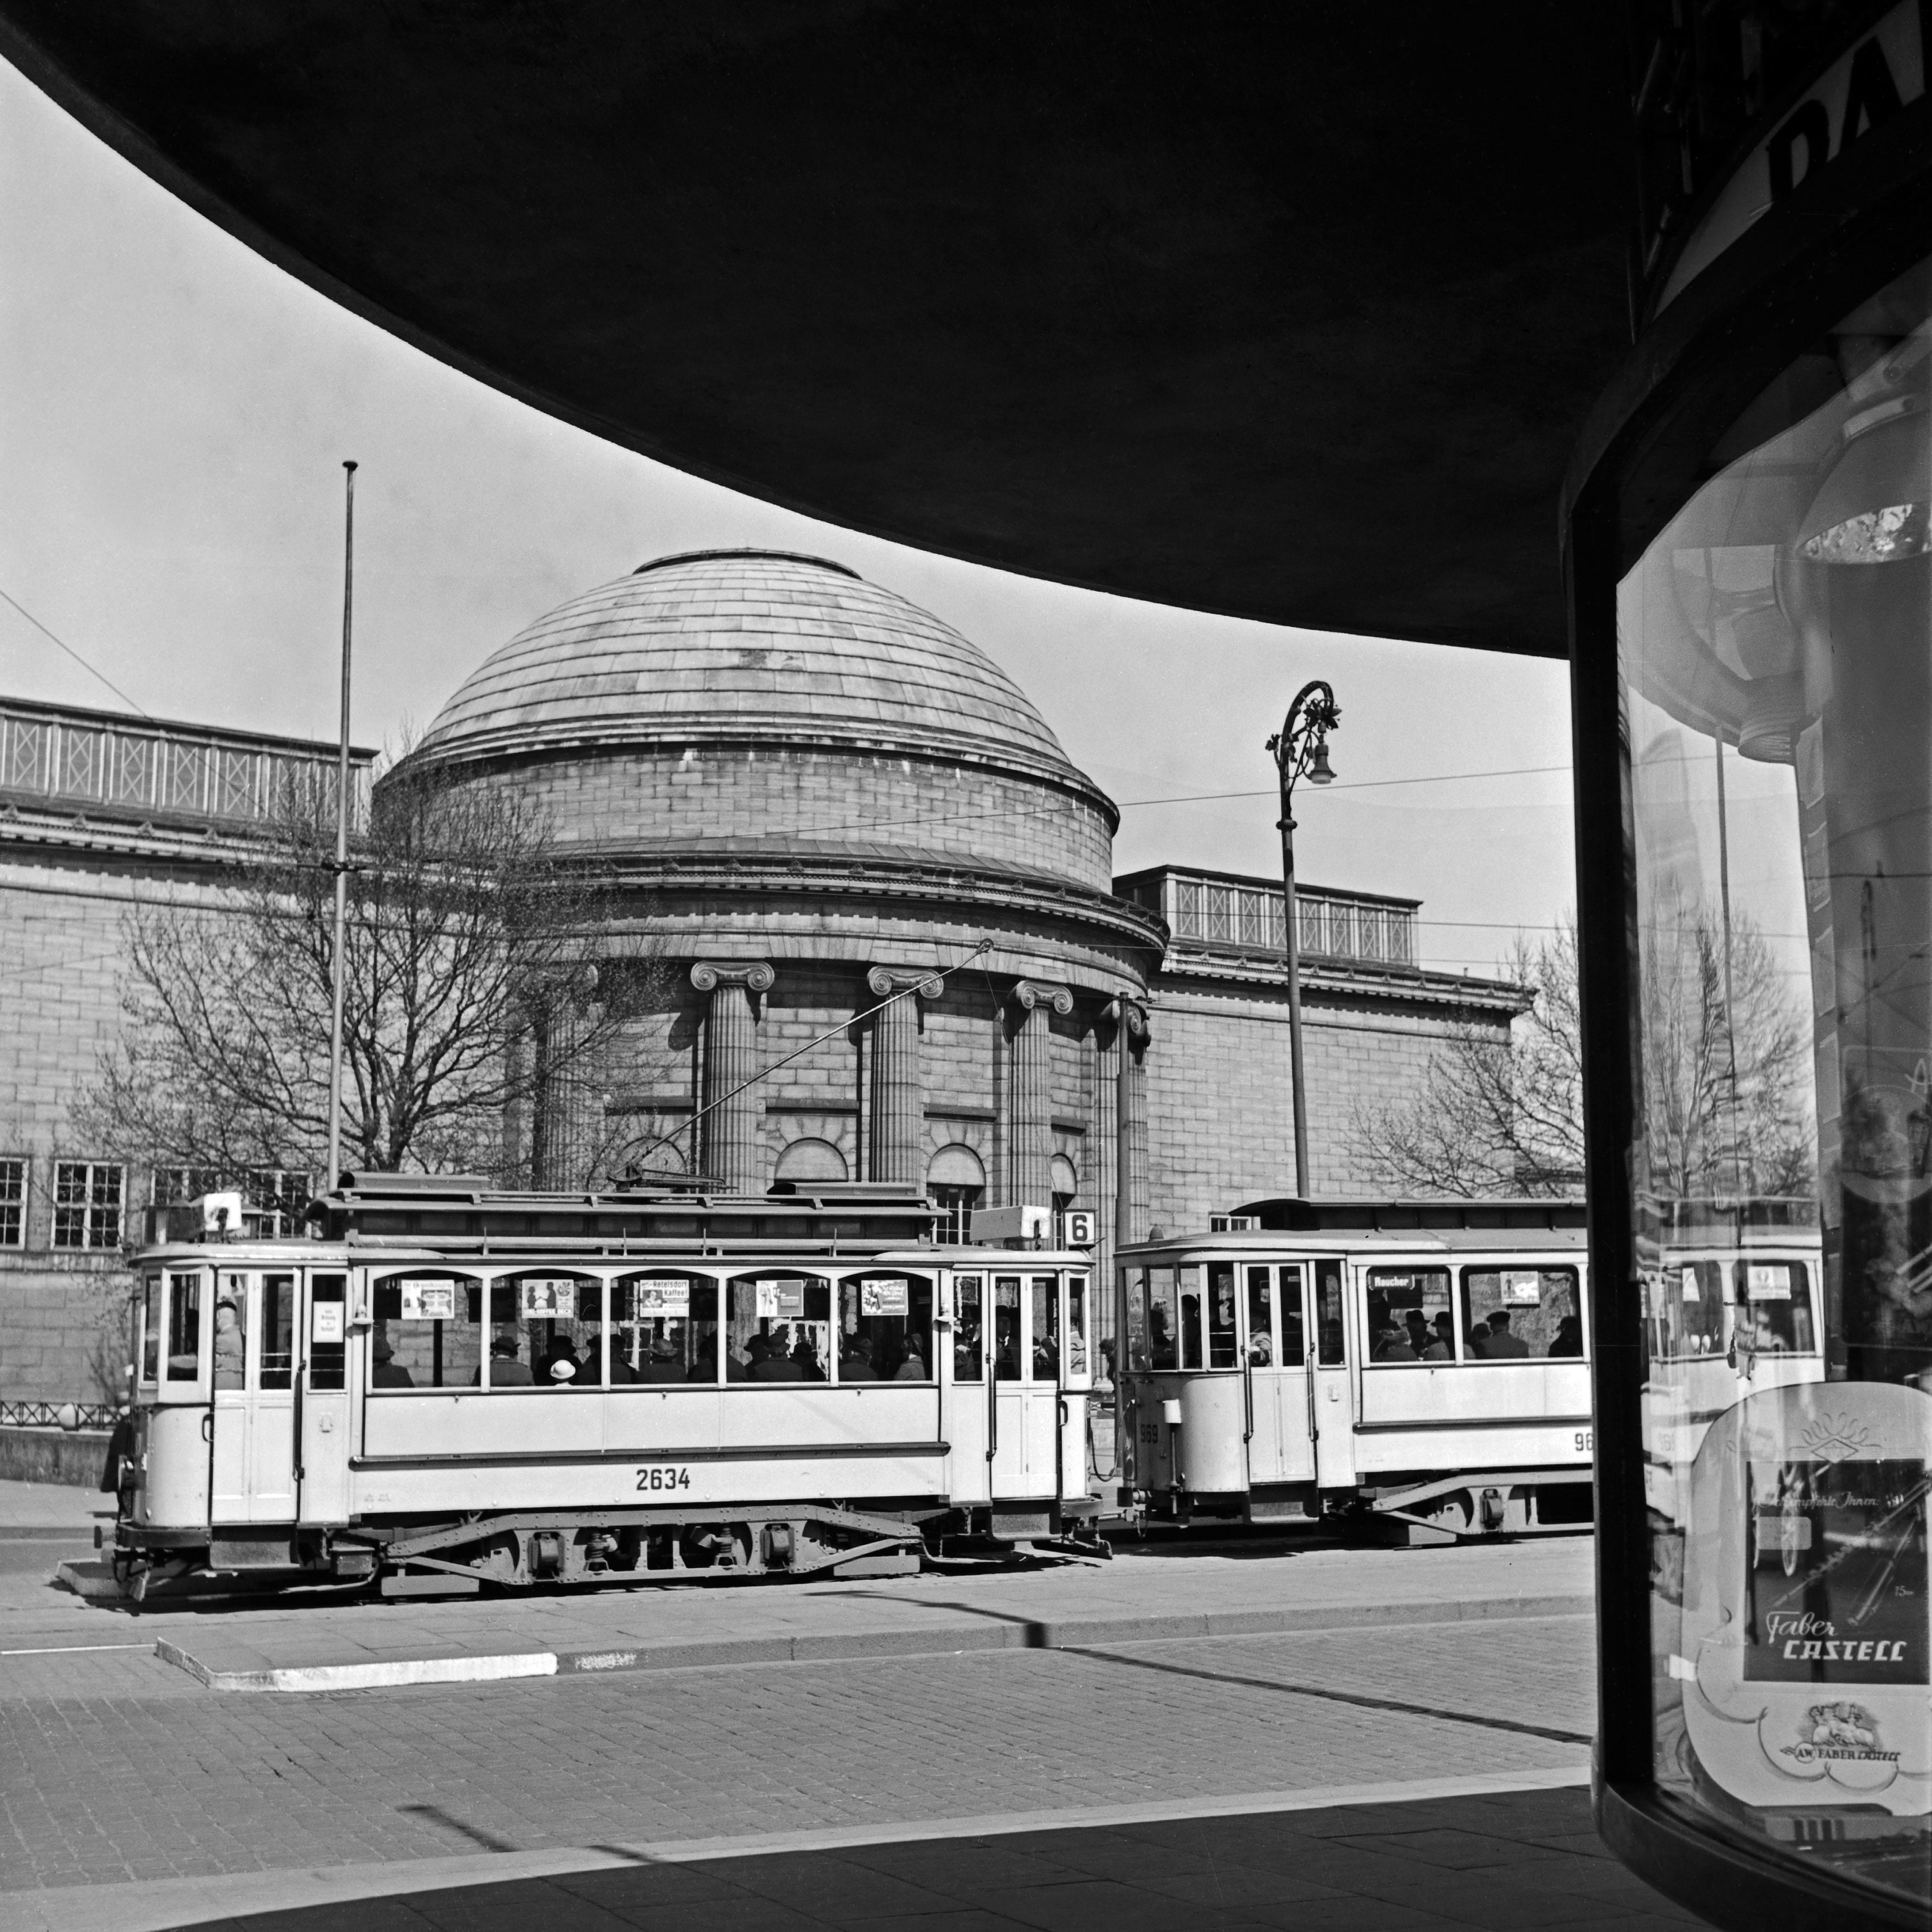 Karl Heinrich Lämmel Black and White Photograph - A tram passes the Kunsthalle at Hamburg, Germany 1938, Printed Later 